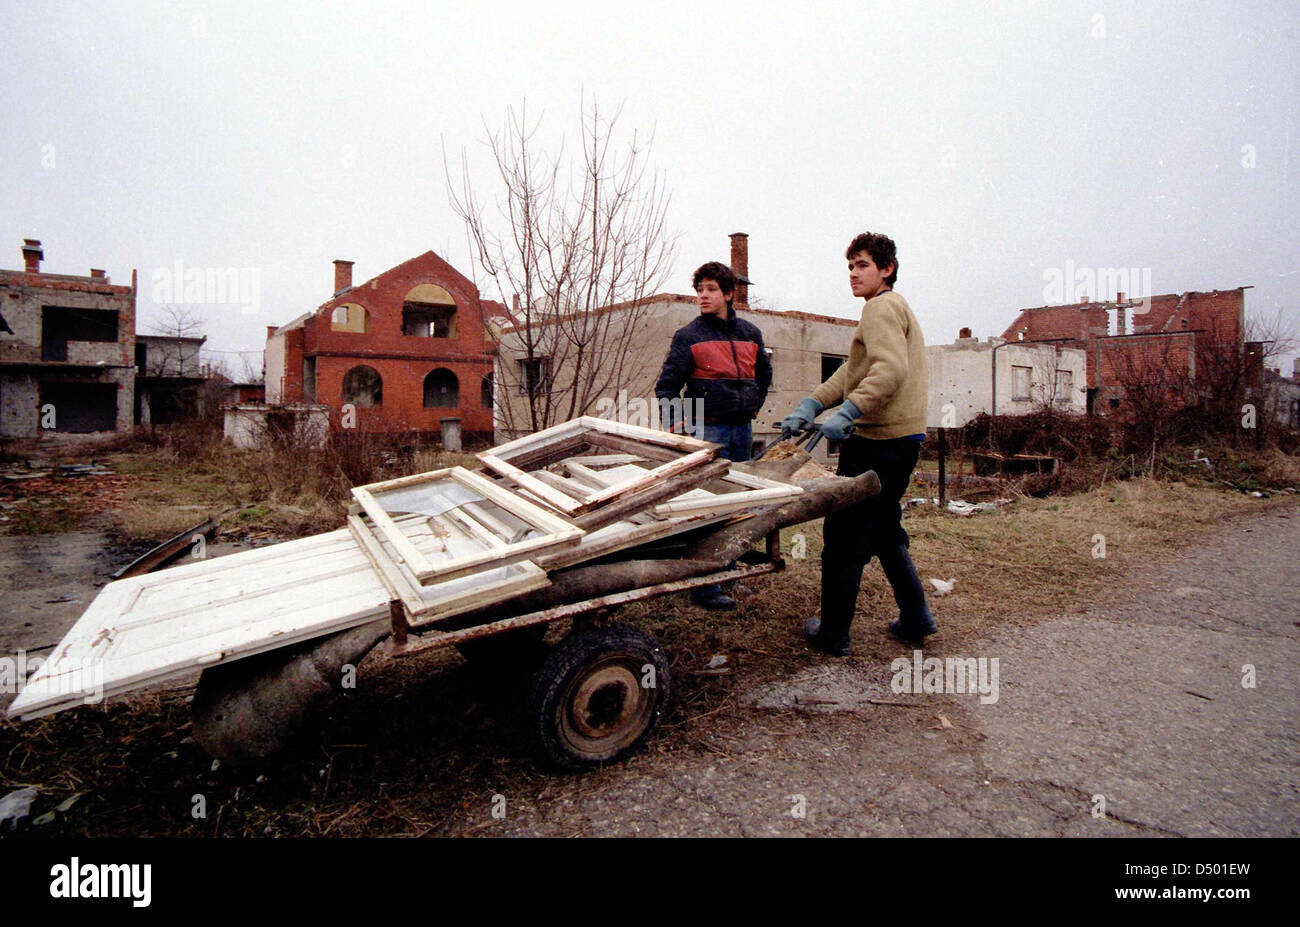 BRCKO, BOSNIA , 08 DECEMBER 1997 ---- Bosnian Moslem men rebuild their home in the contested Bosnian city of Brcko. Thousands of Moslems were ethnically cleansed from Brcko early on in the Bosnian conflict, but with NATO forces guaranteeing their safety many have returned. Stock Photo